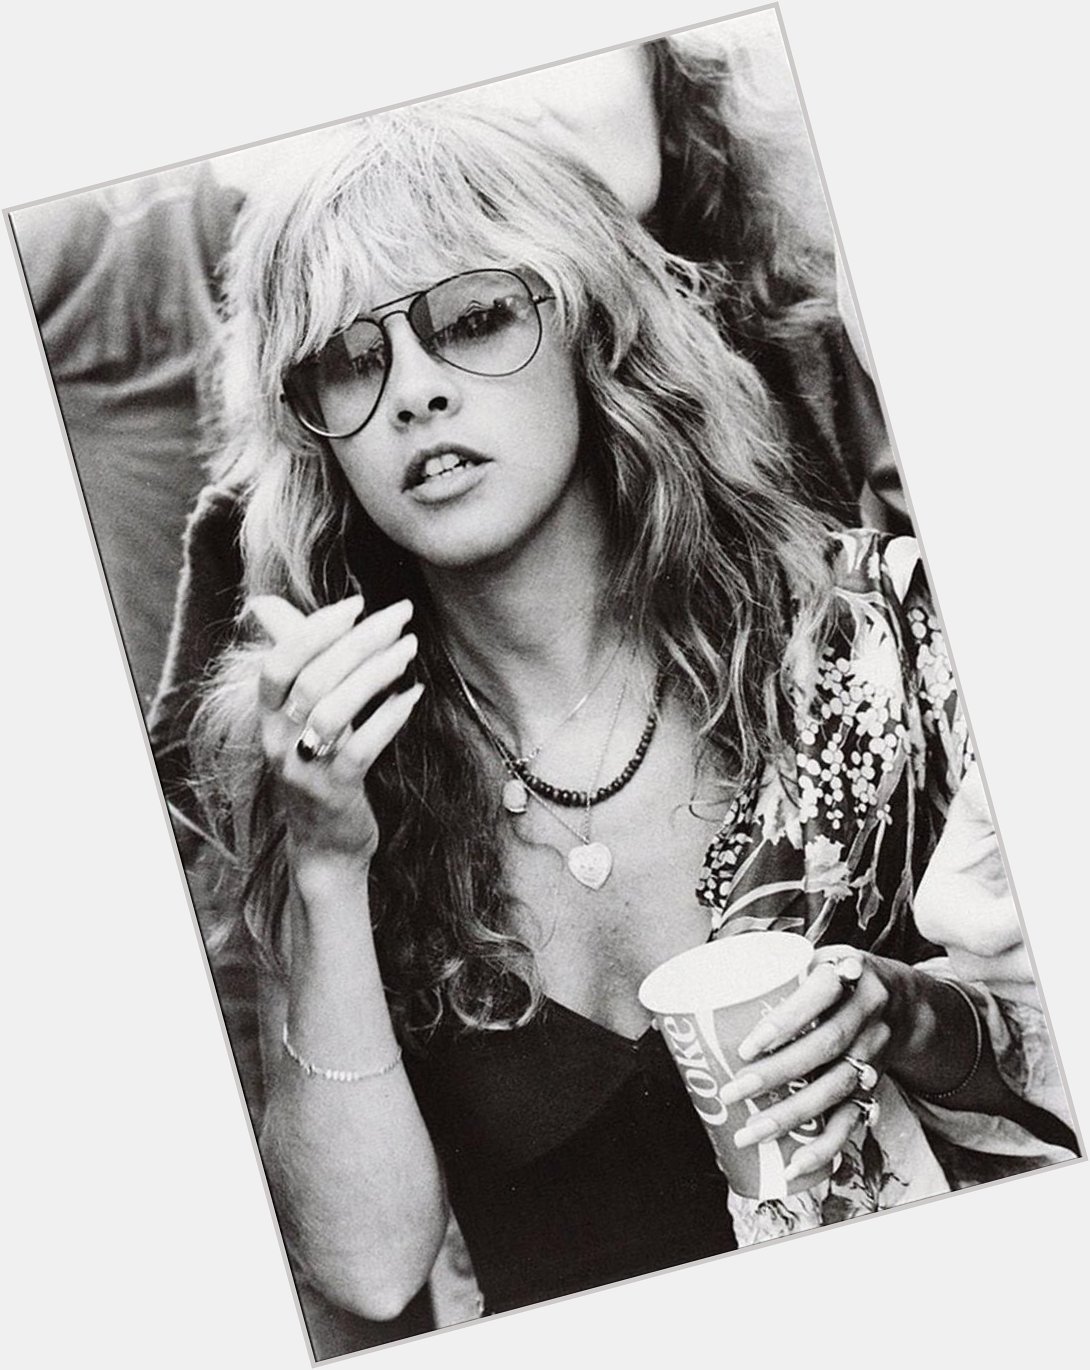 Happy birthday to the absolute LEGEND stevie nicks 